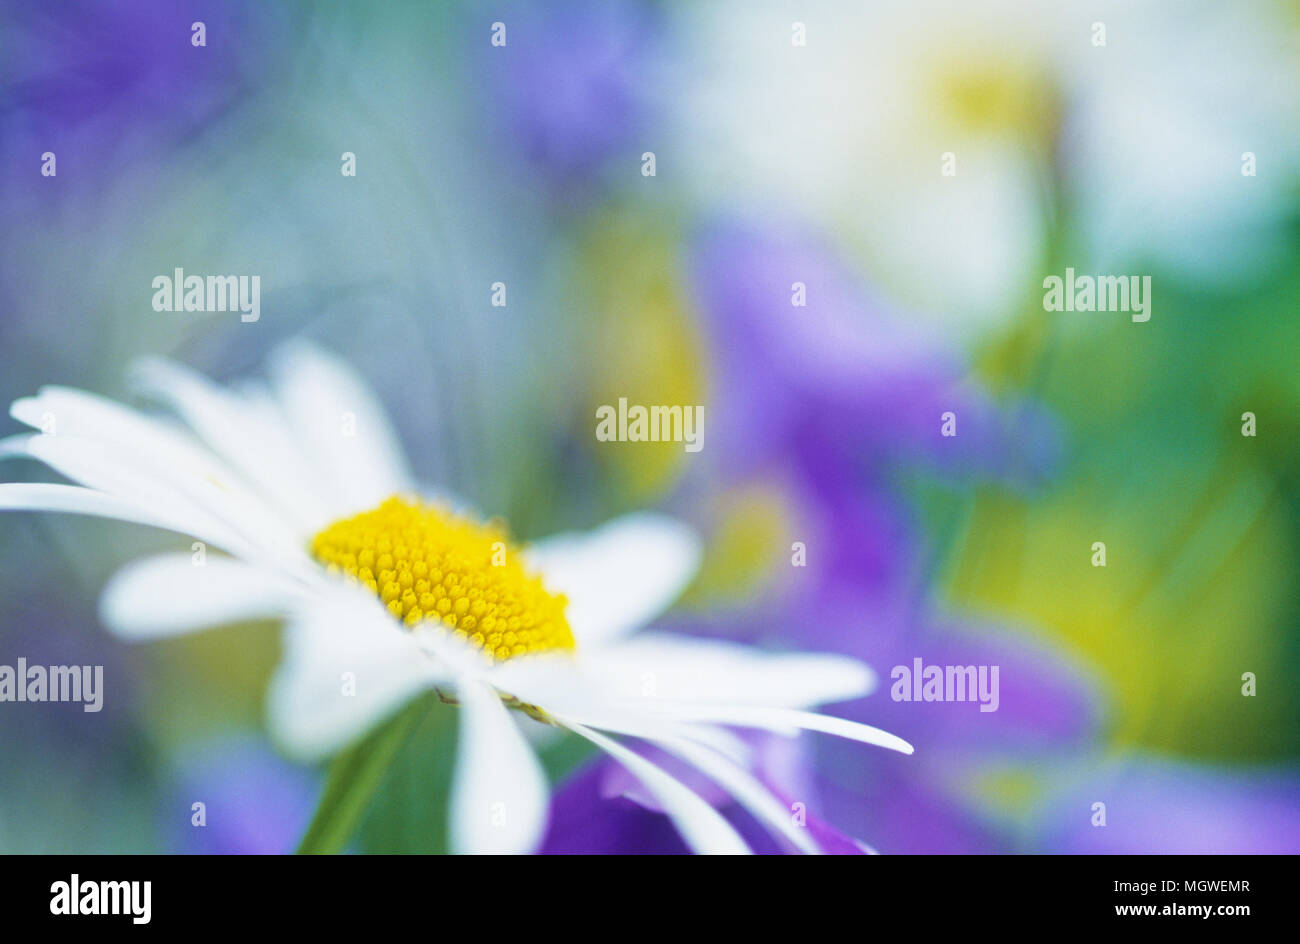 Oxeye daisies (Leucanthemum vulgare) in flower meadow. Selective focus and very shallow depth of field. Stock Photo